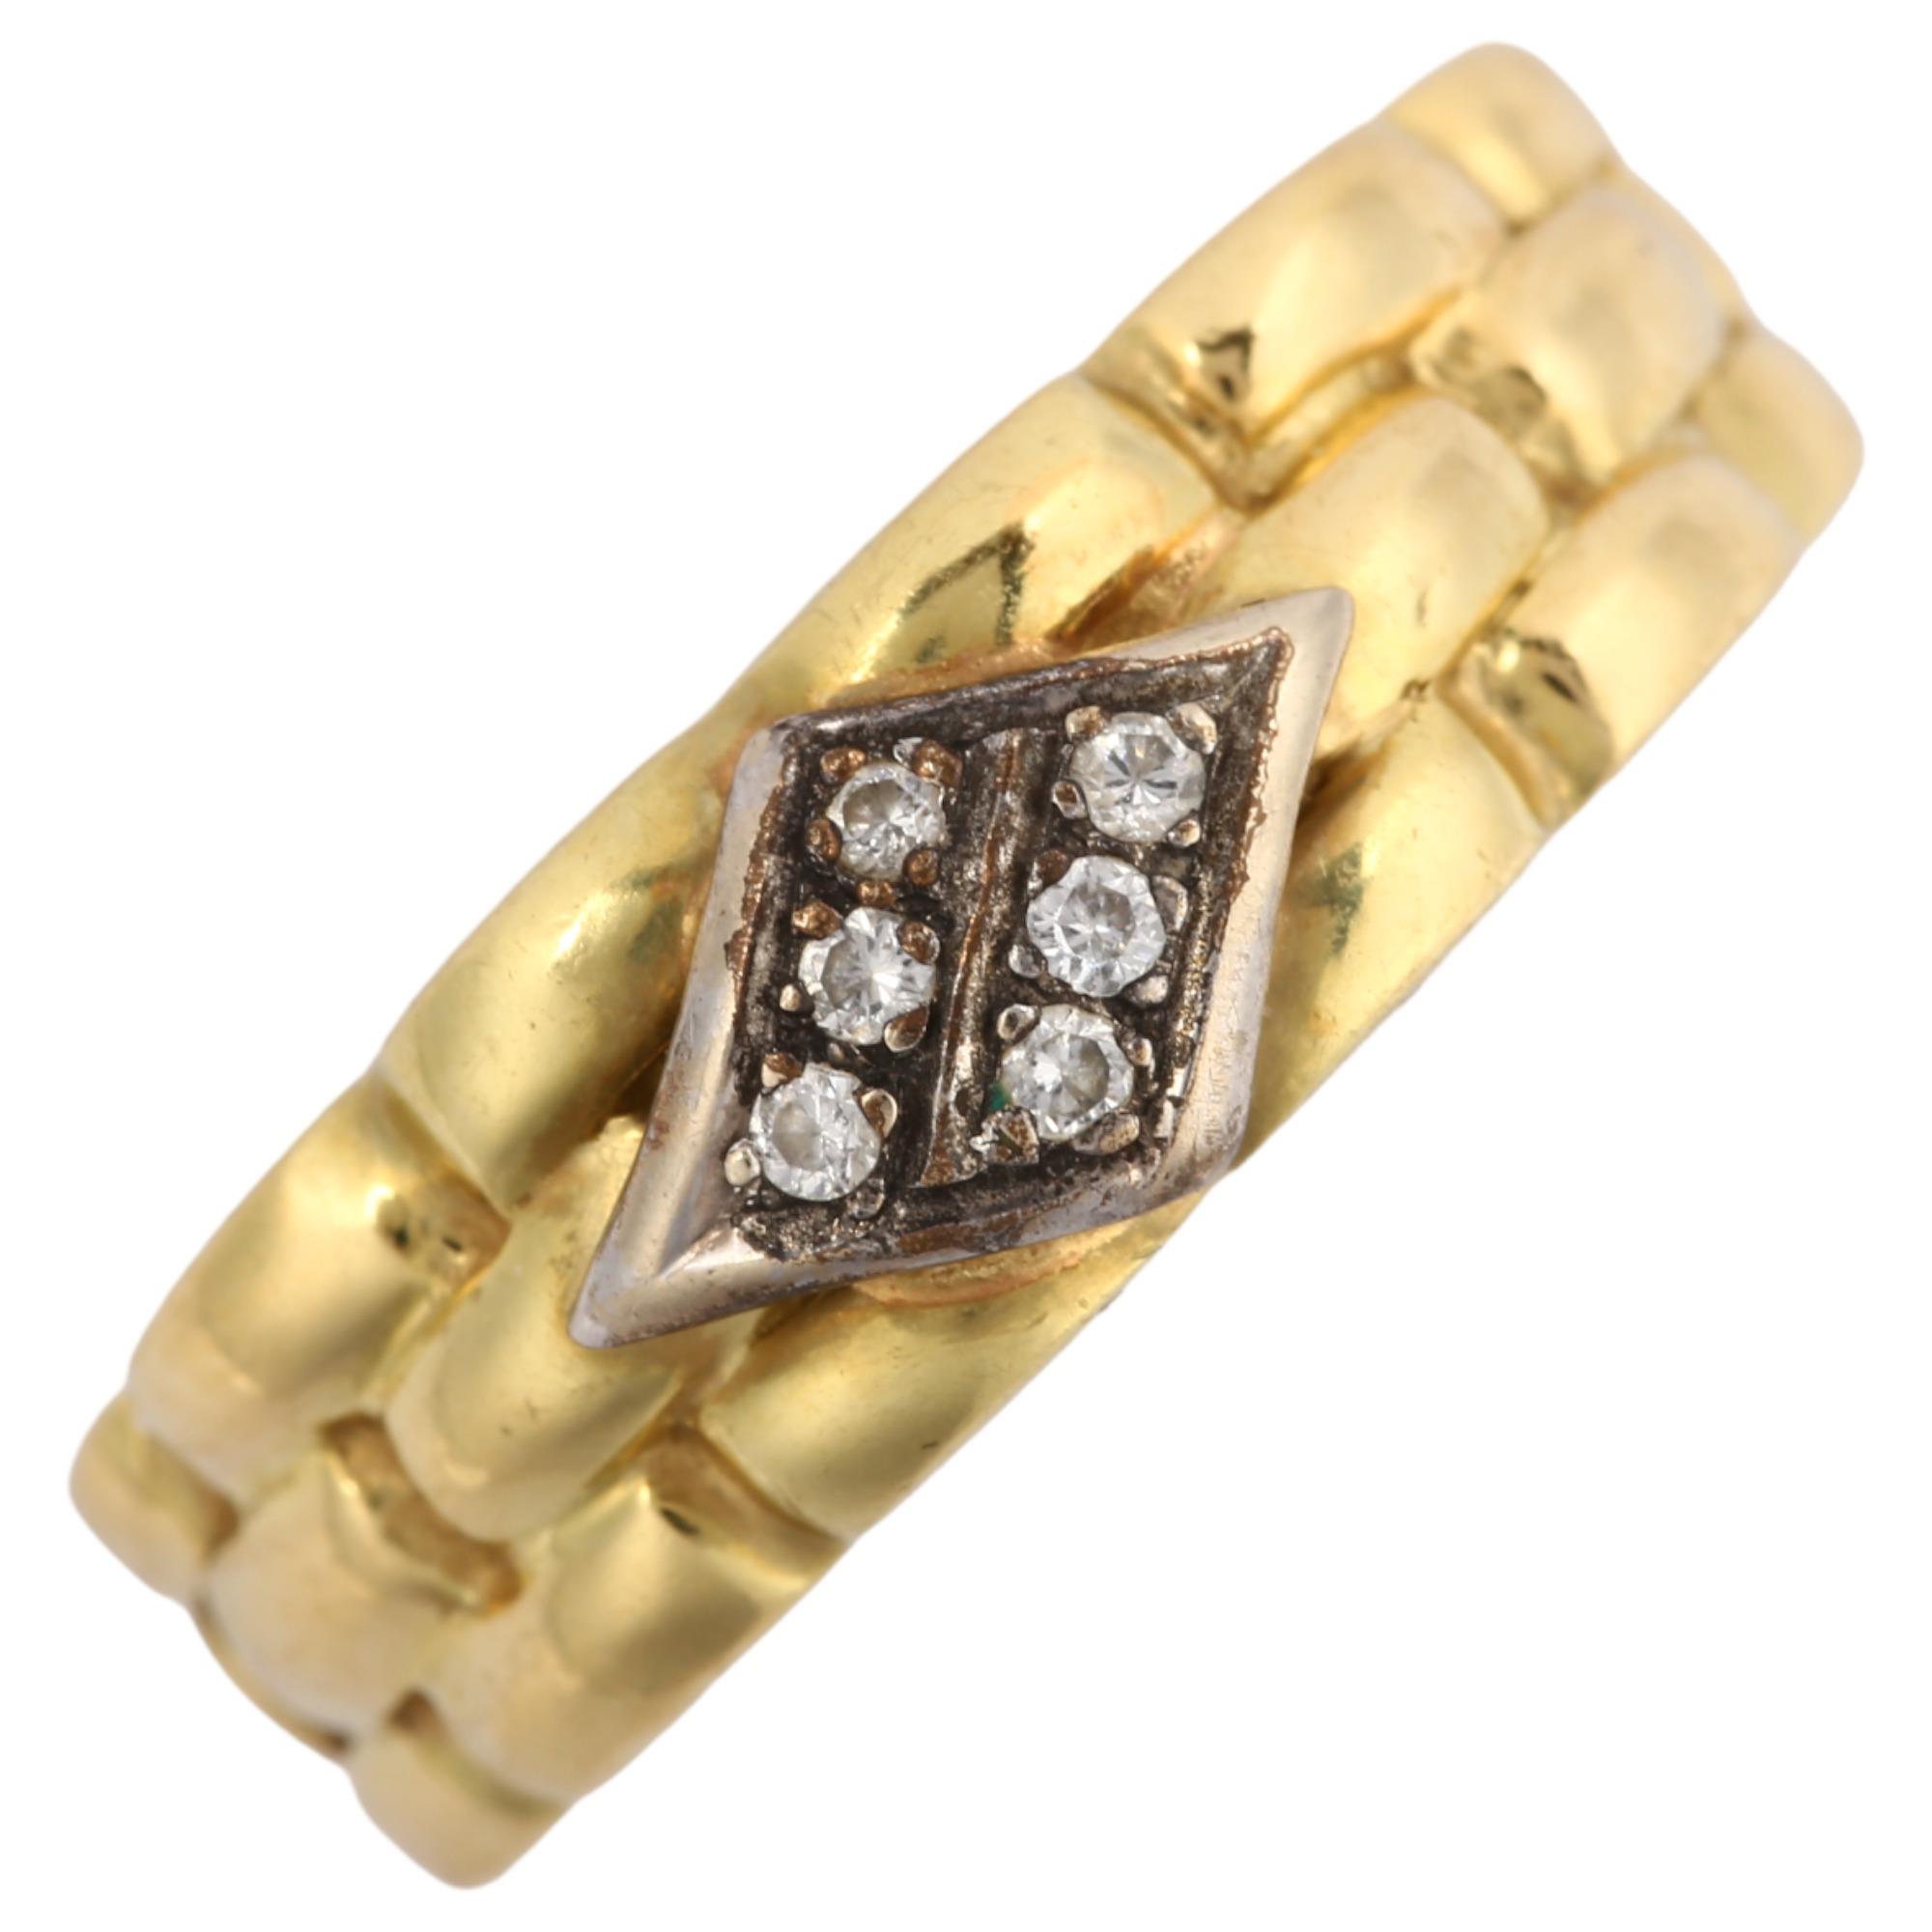 A mid-20th century 18ct gold diamond band ring, gatelink design shoulders set with modern round